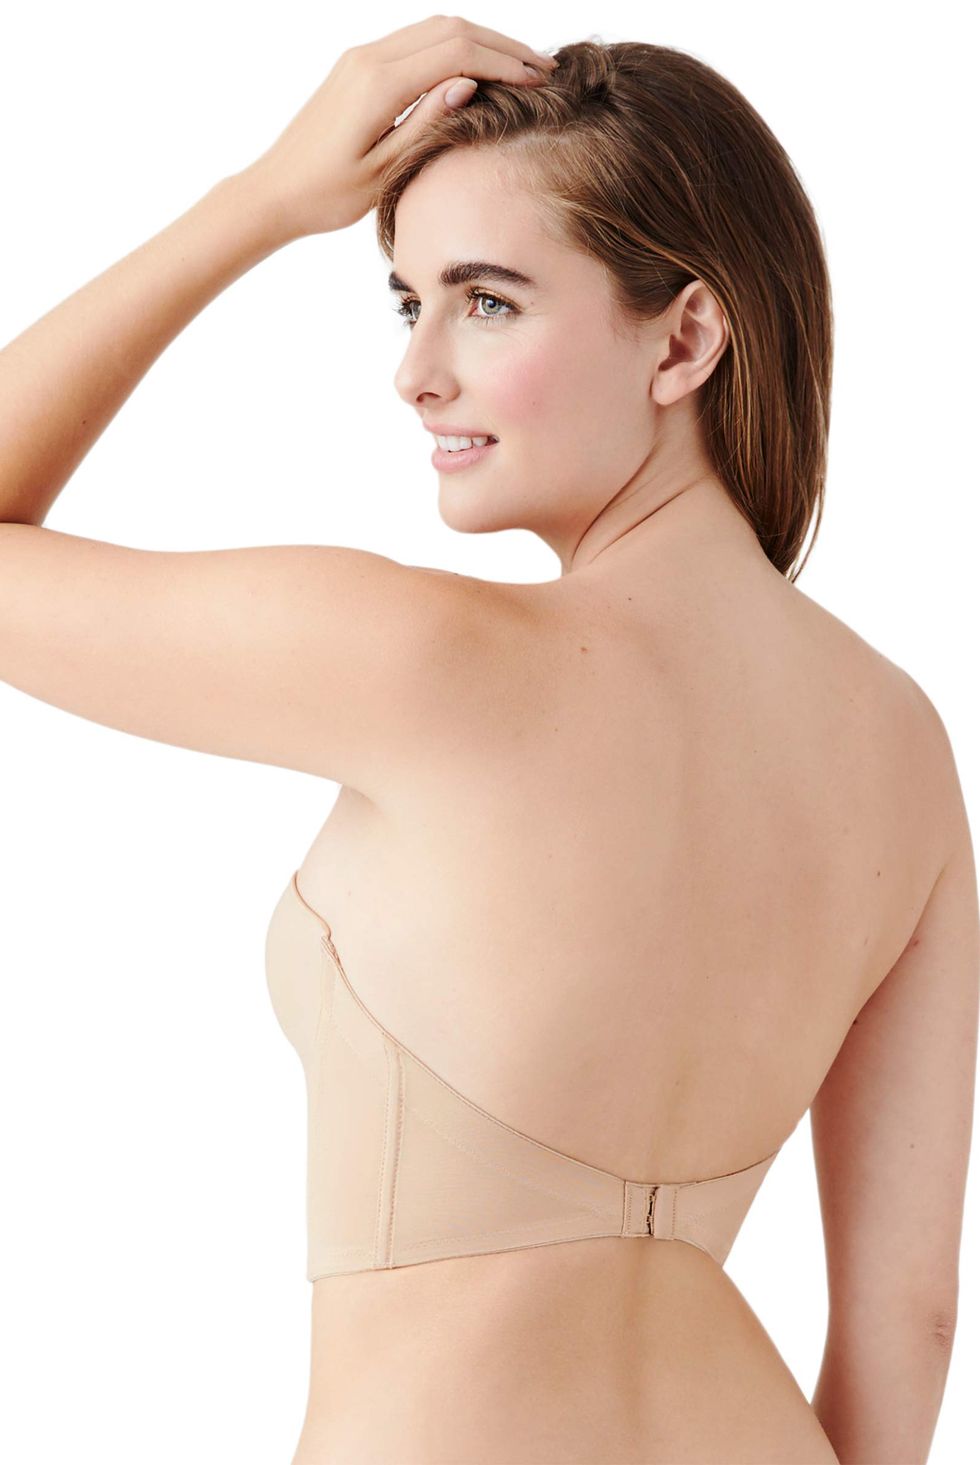 Celebs Wear This Bra With Backless Dresses